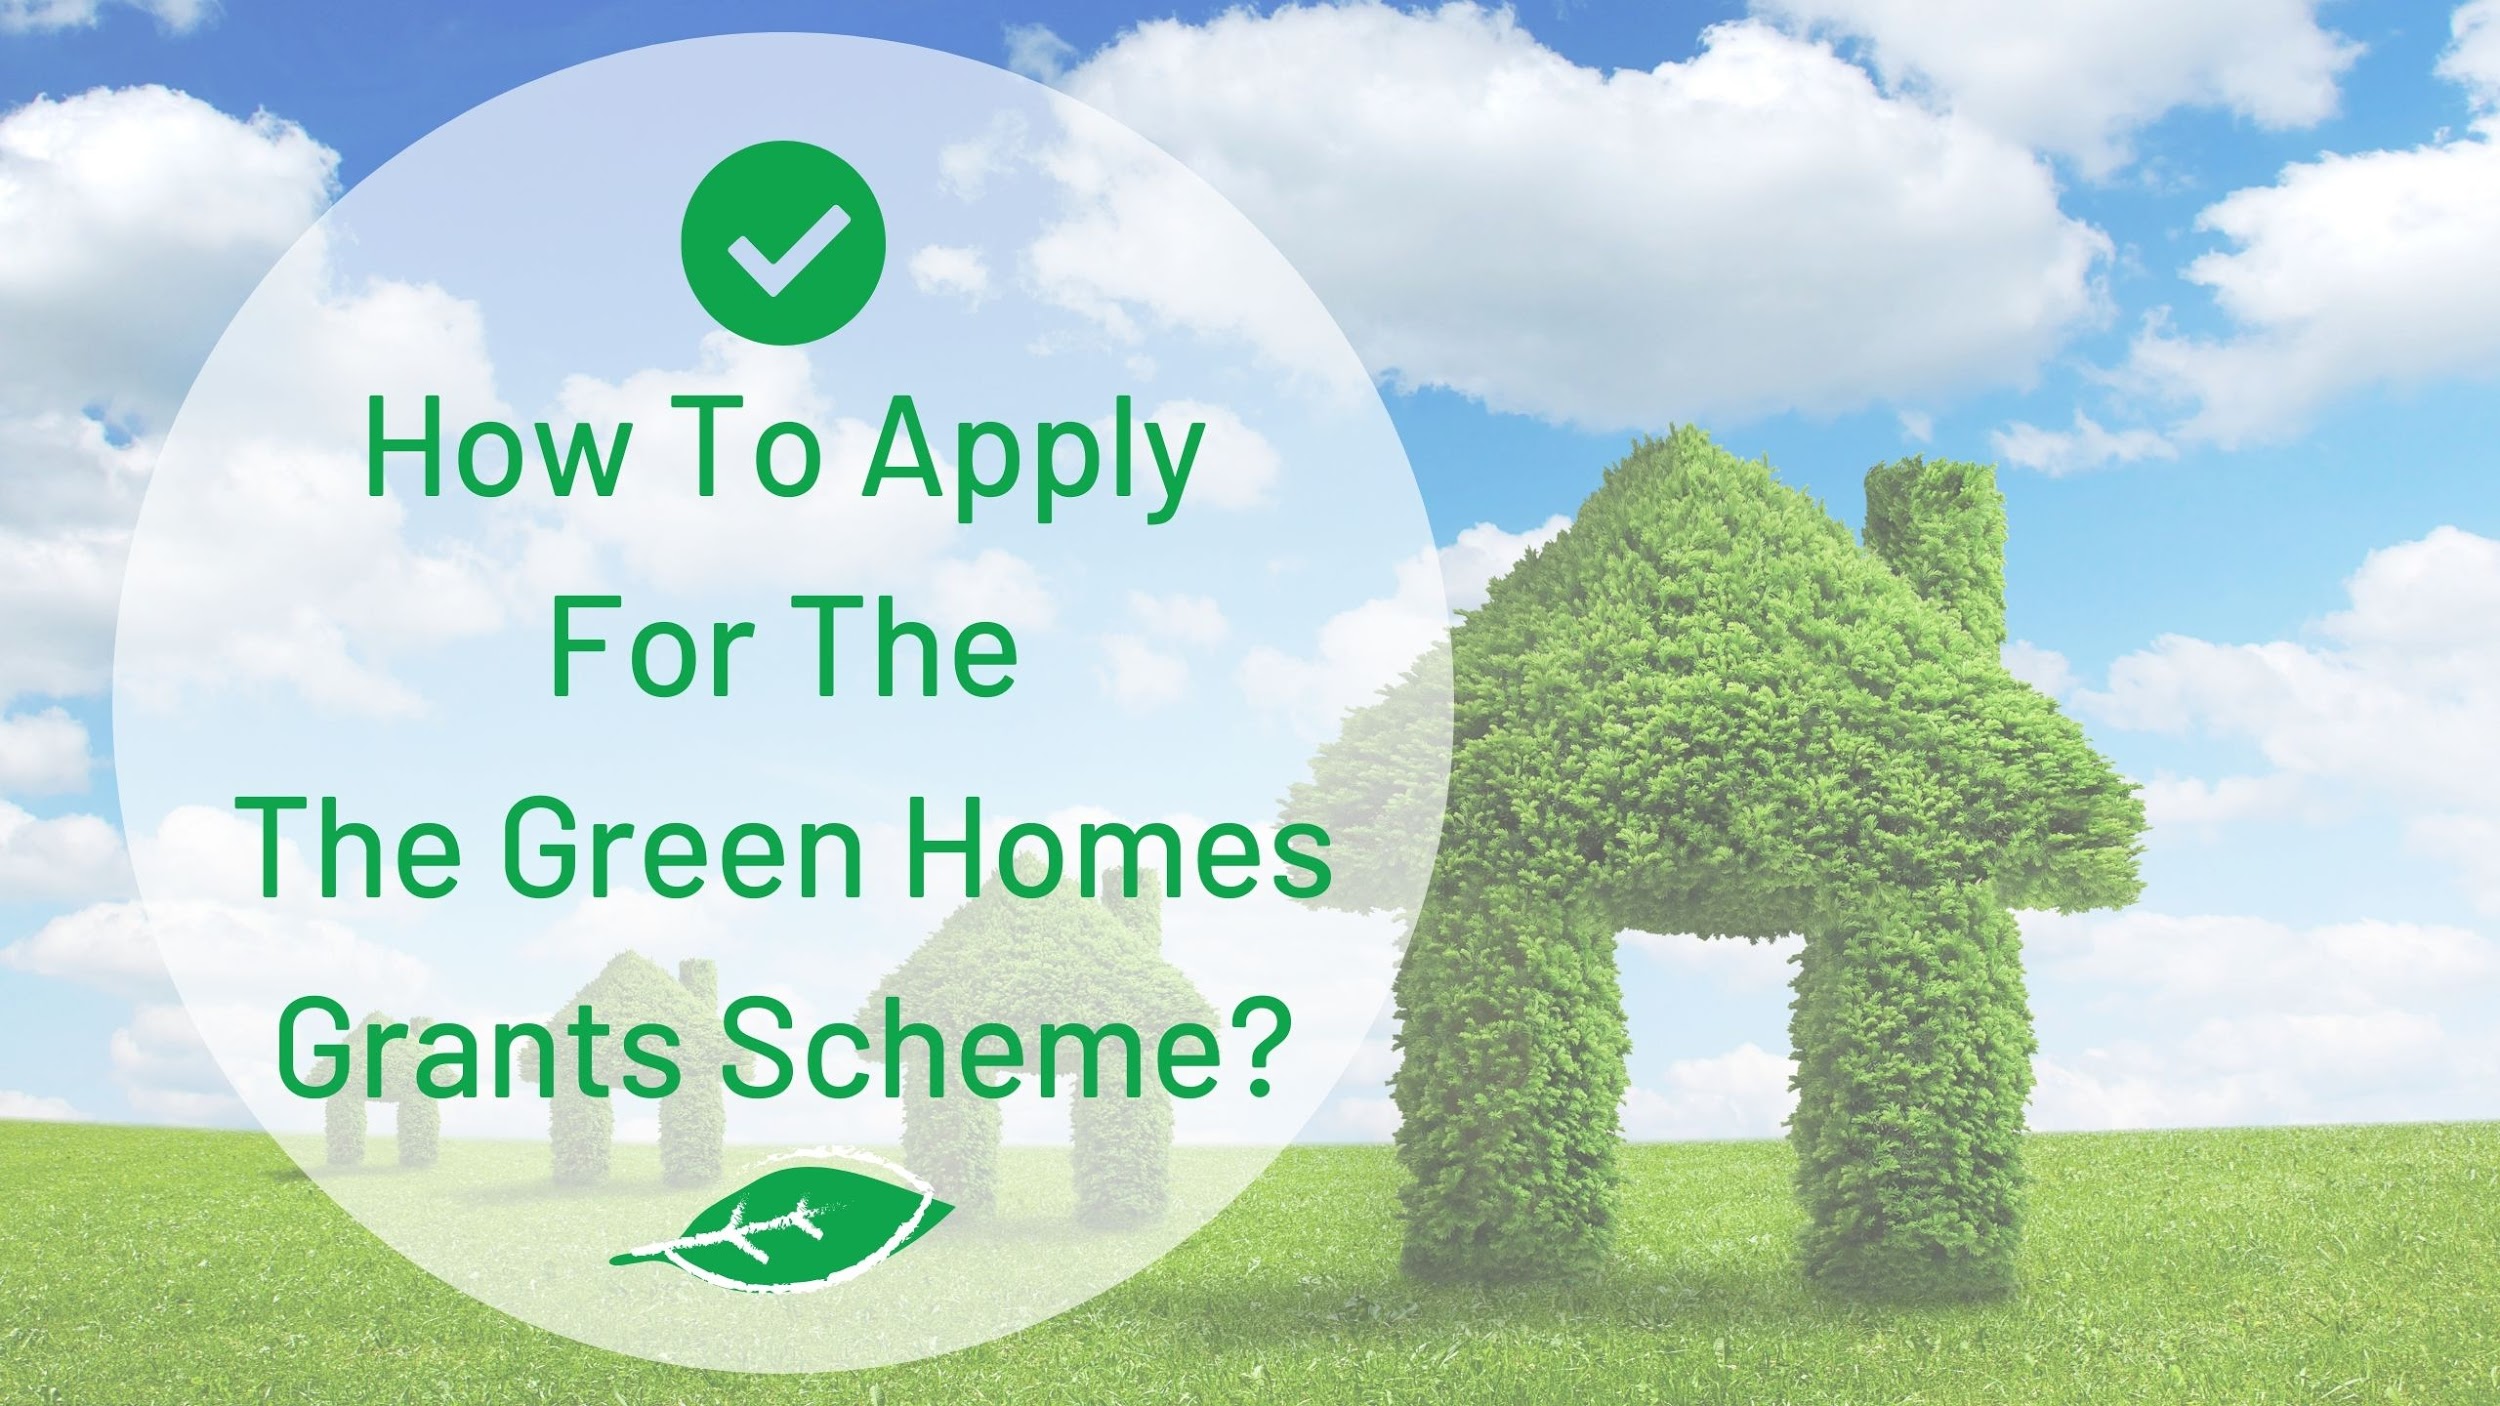 Apply For The The Green Homes Grants Scheme